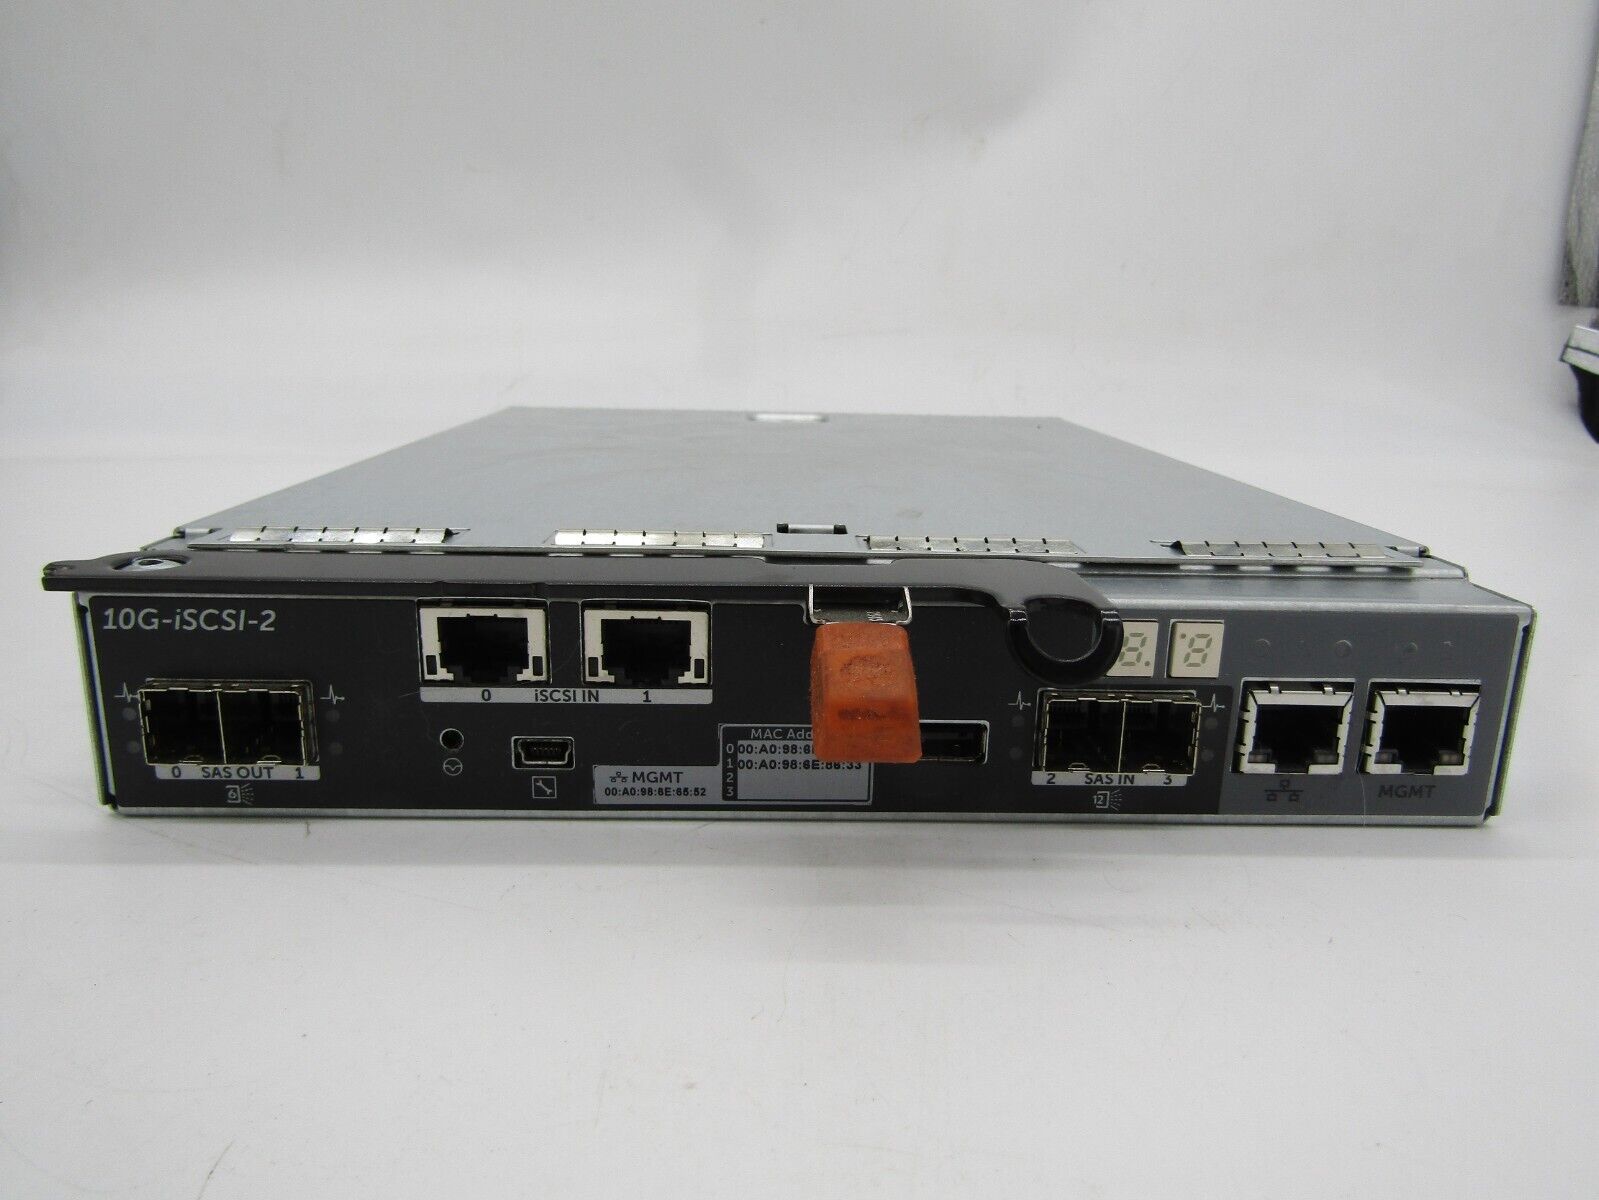 Dell PowerVault MD3800i MD3820i Controller 10G-iSCSI-2 7YJ34 E02M 111-02782